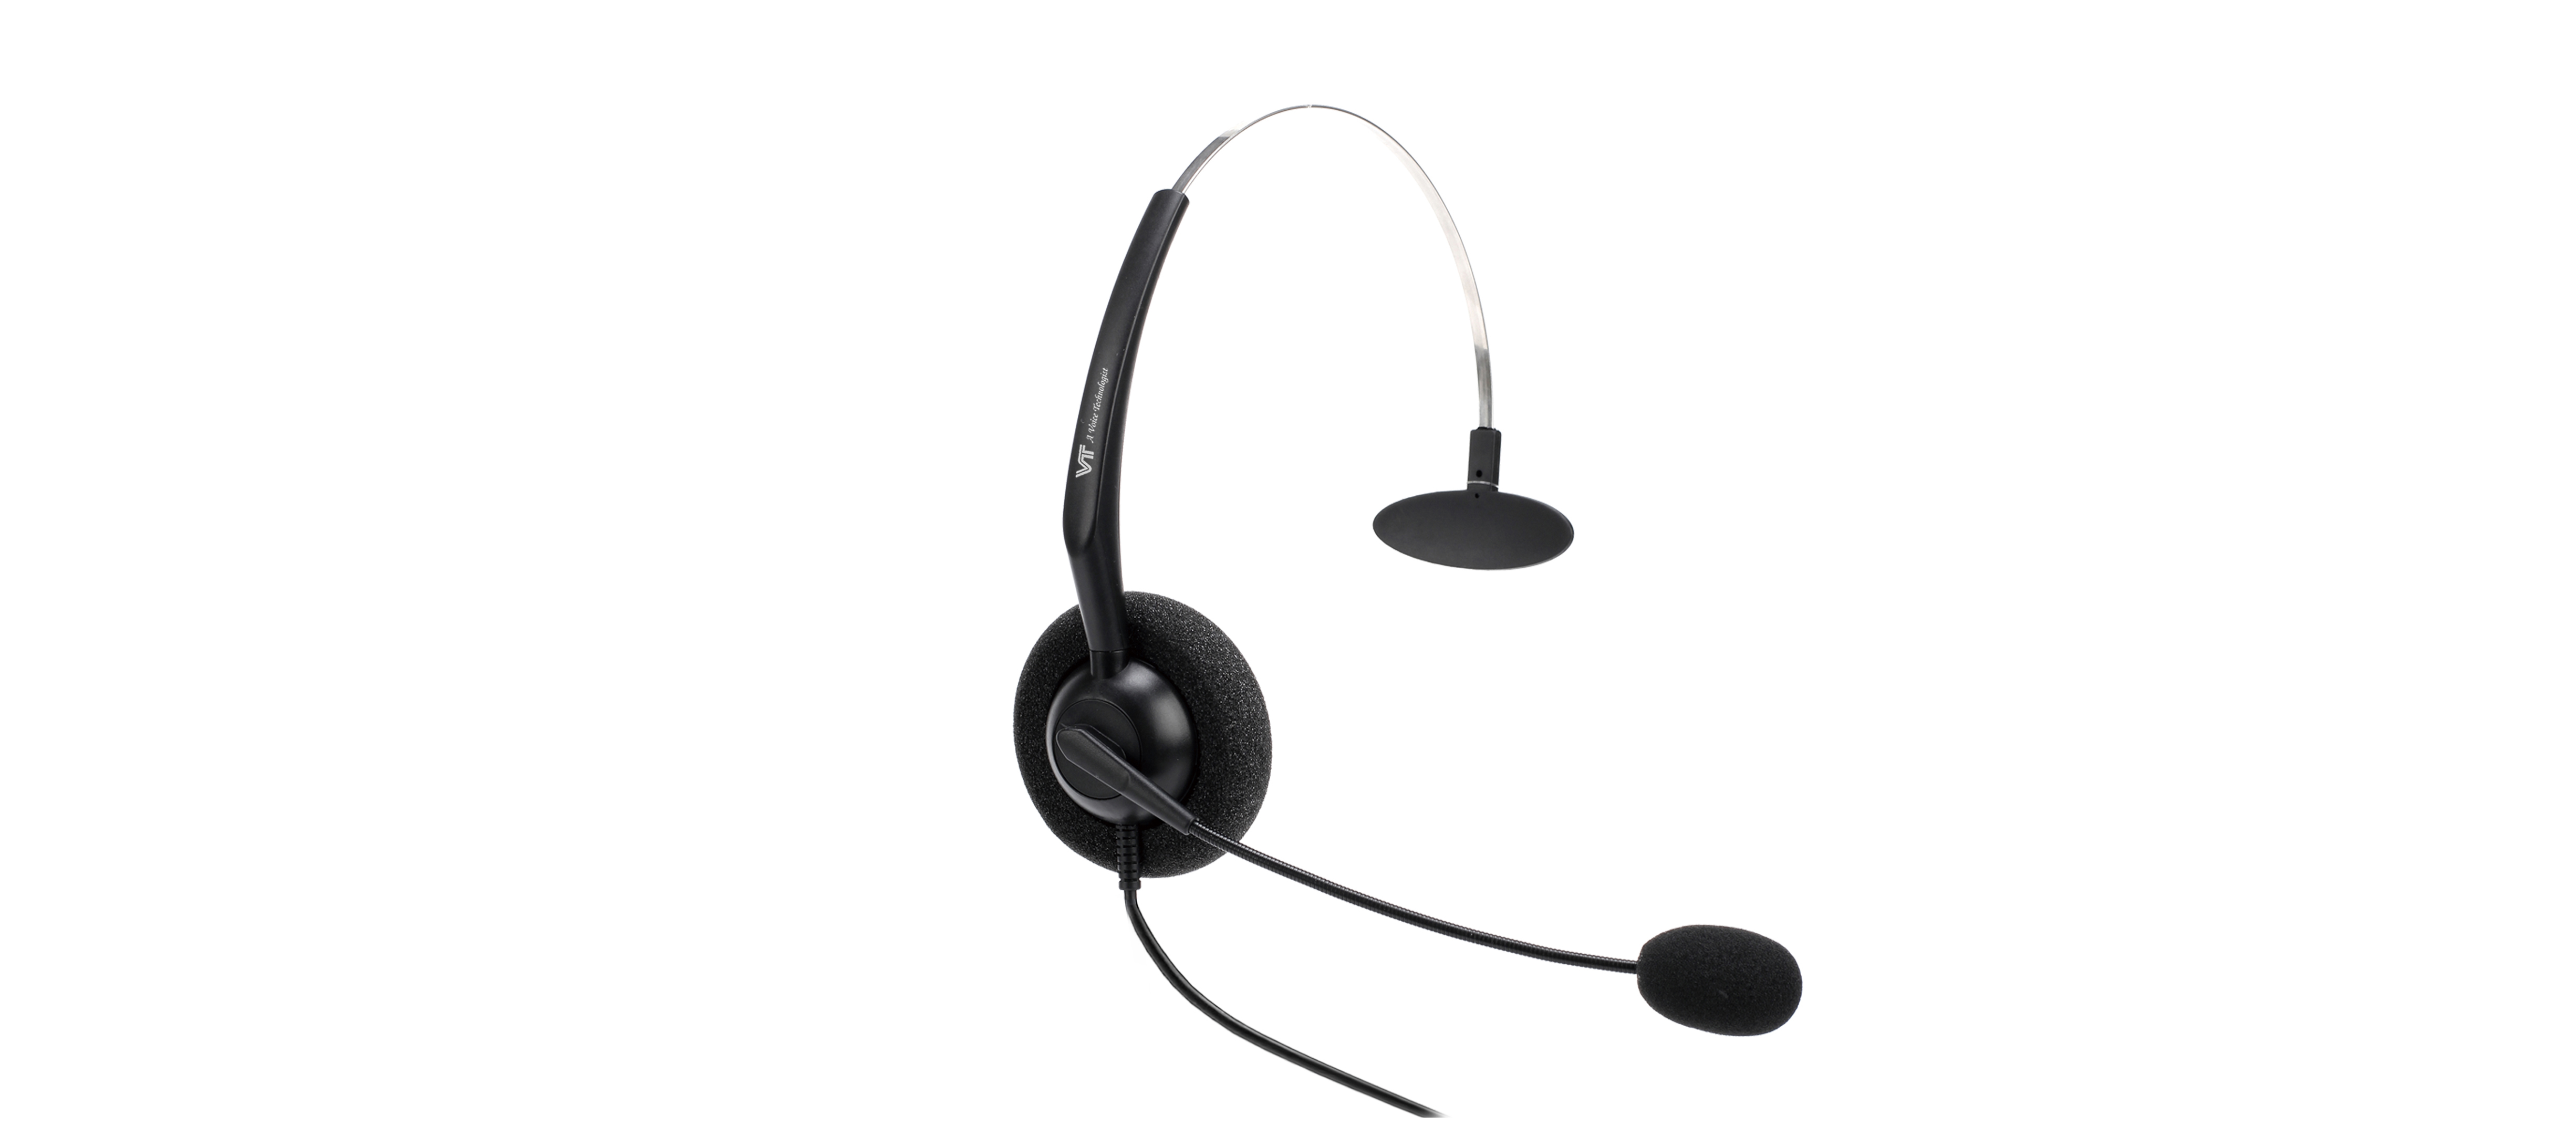 simple corded headset for occasional use